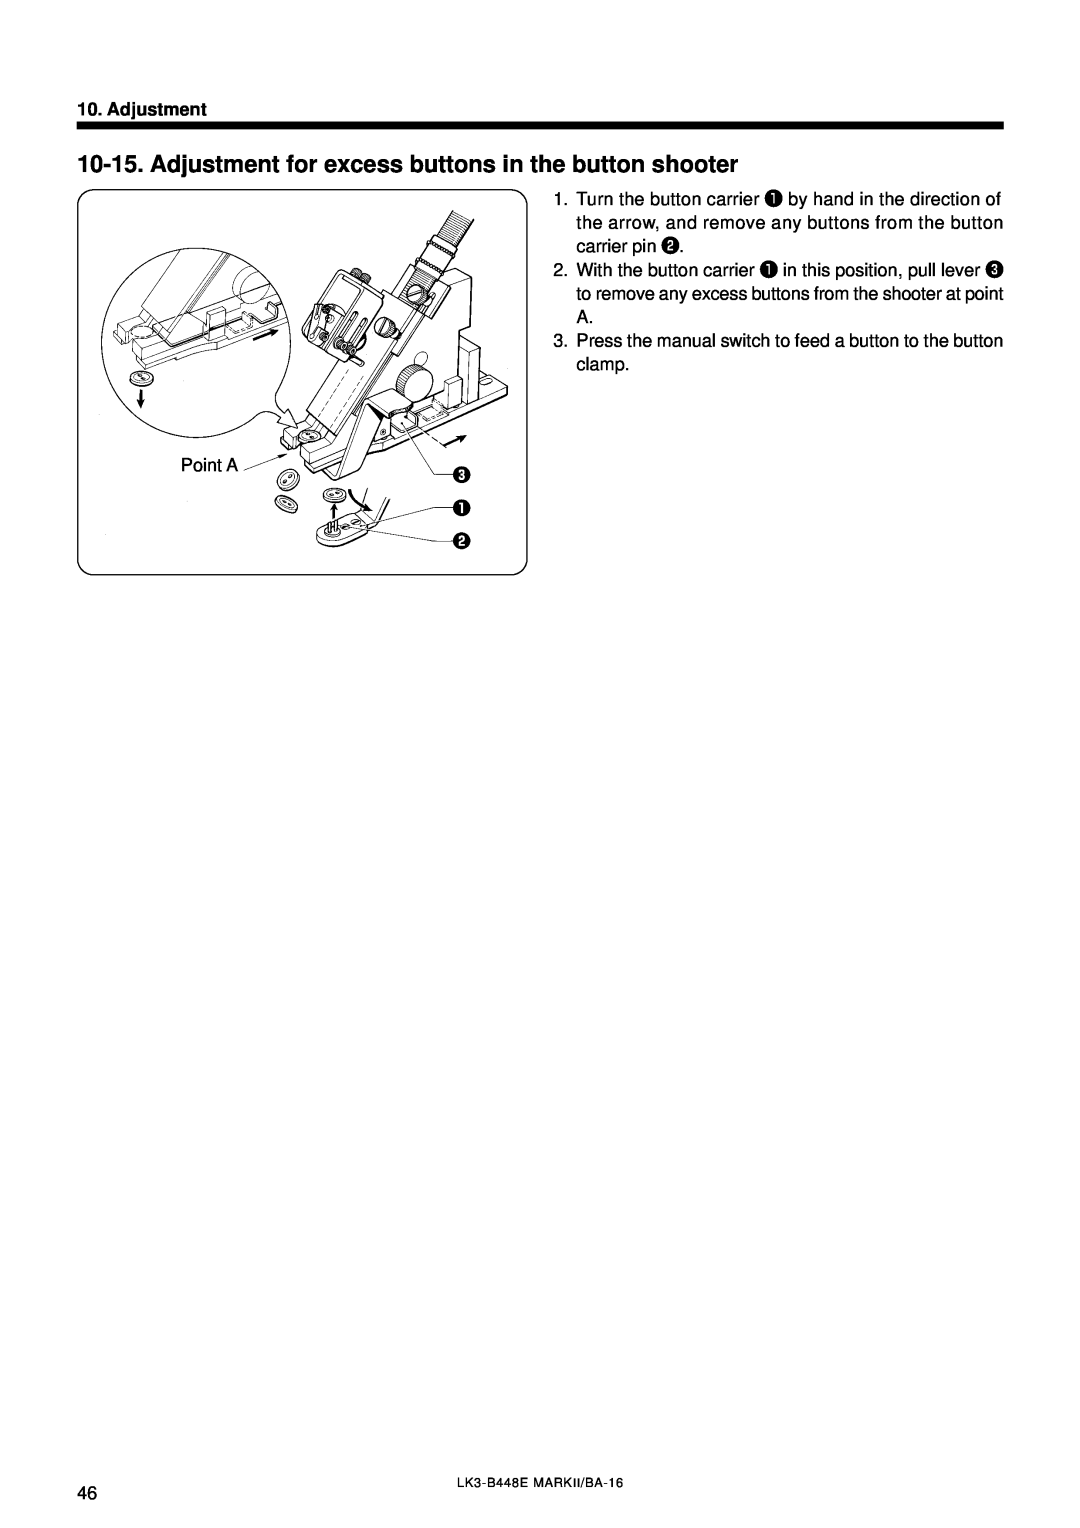 Brother instruction manual Adjustment for excess buttons in the button shooter, Point A, LK3-B448E MARKII/BA-16 